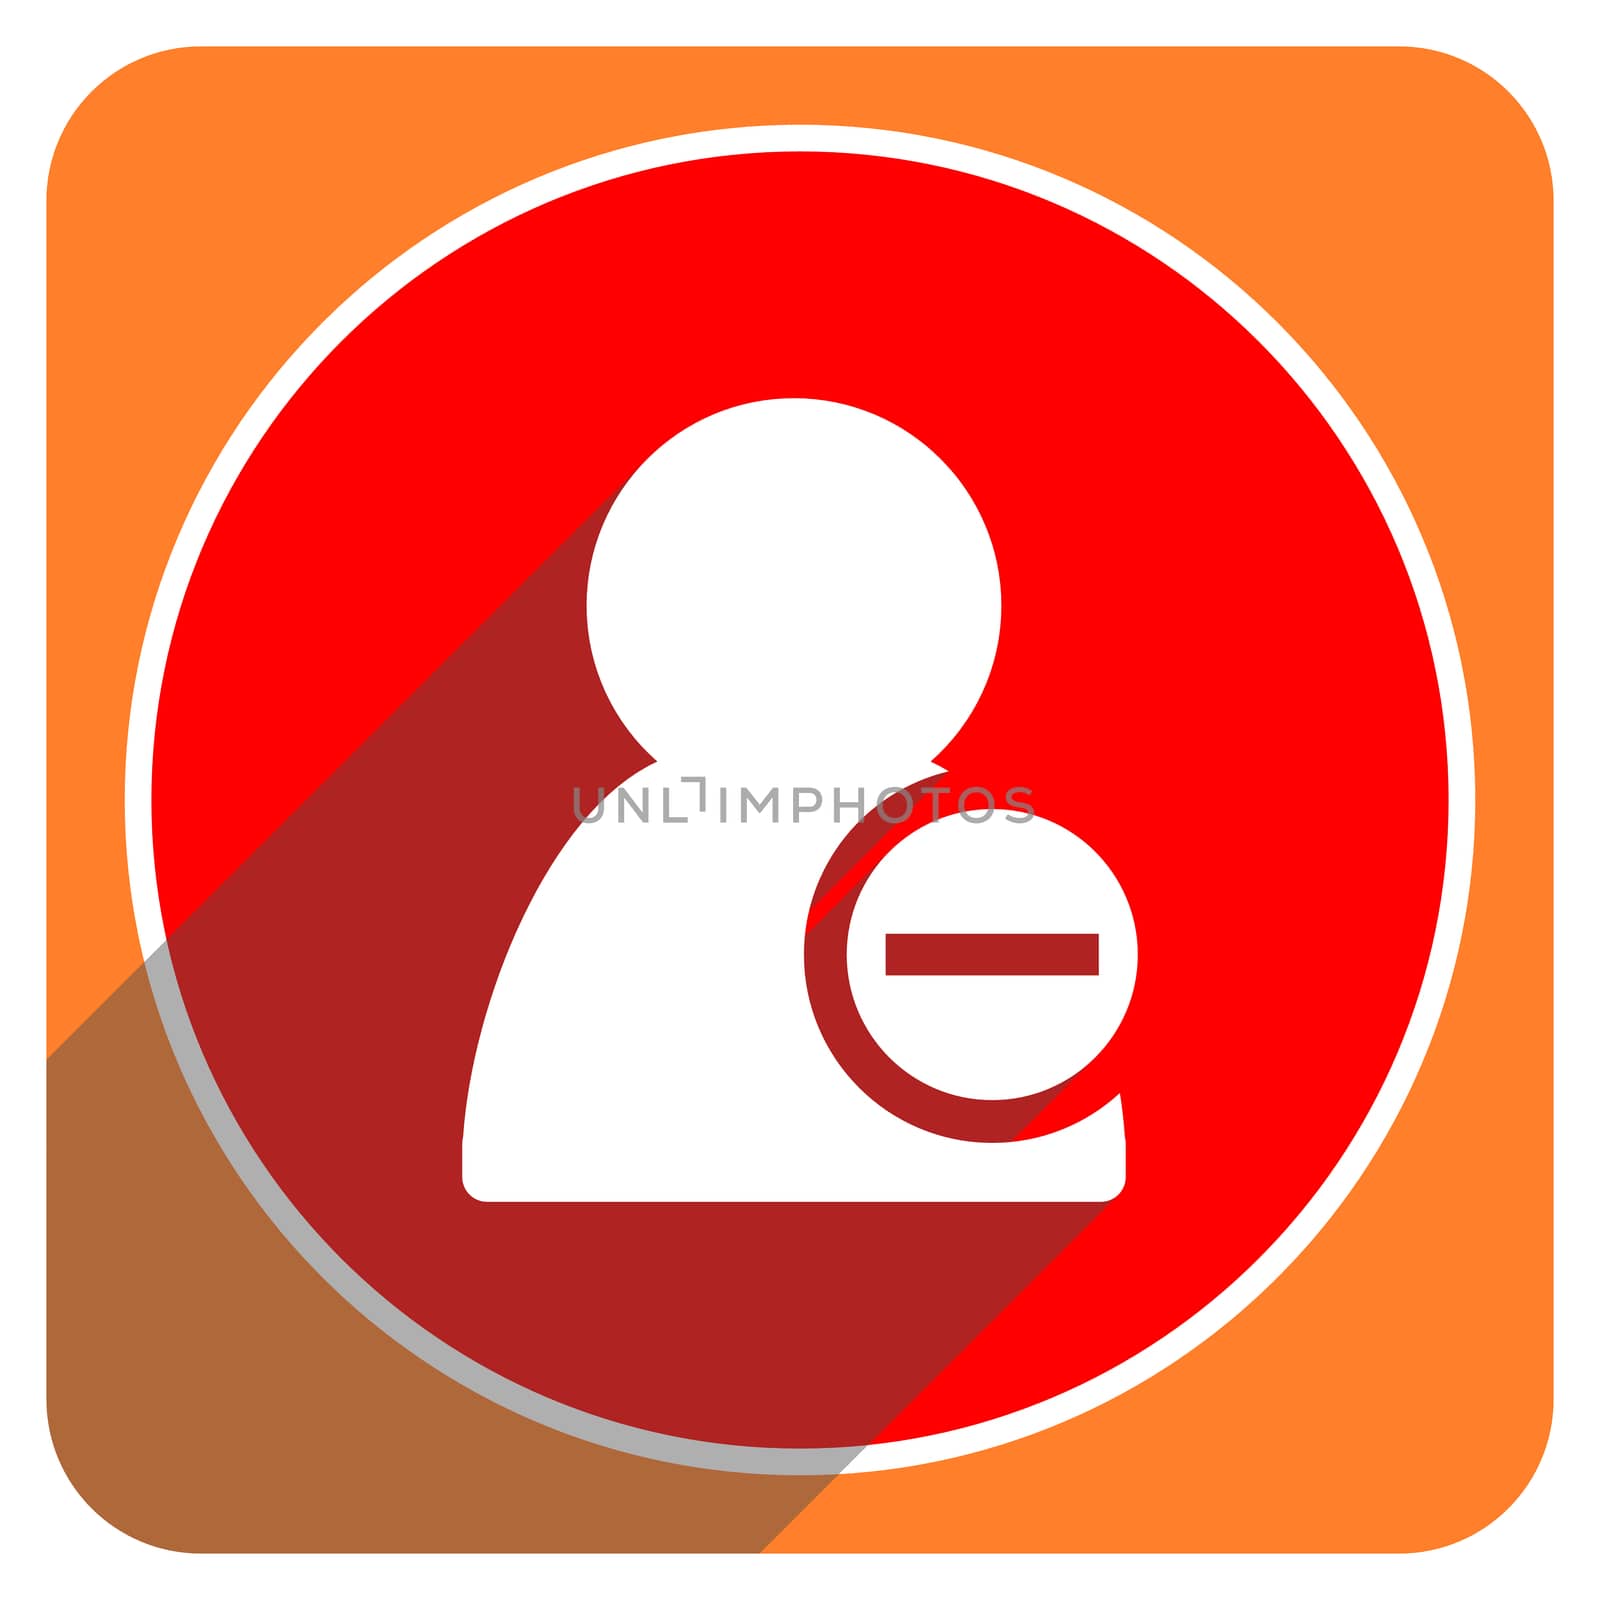 remove contact red flat icon isolated by alexwhite